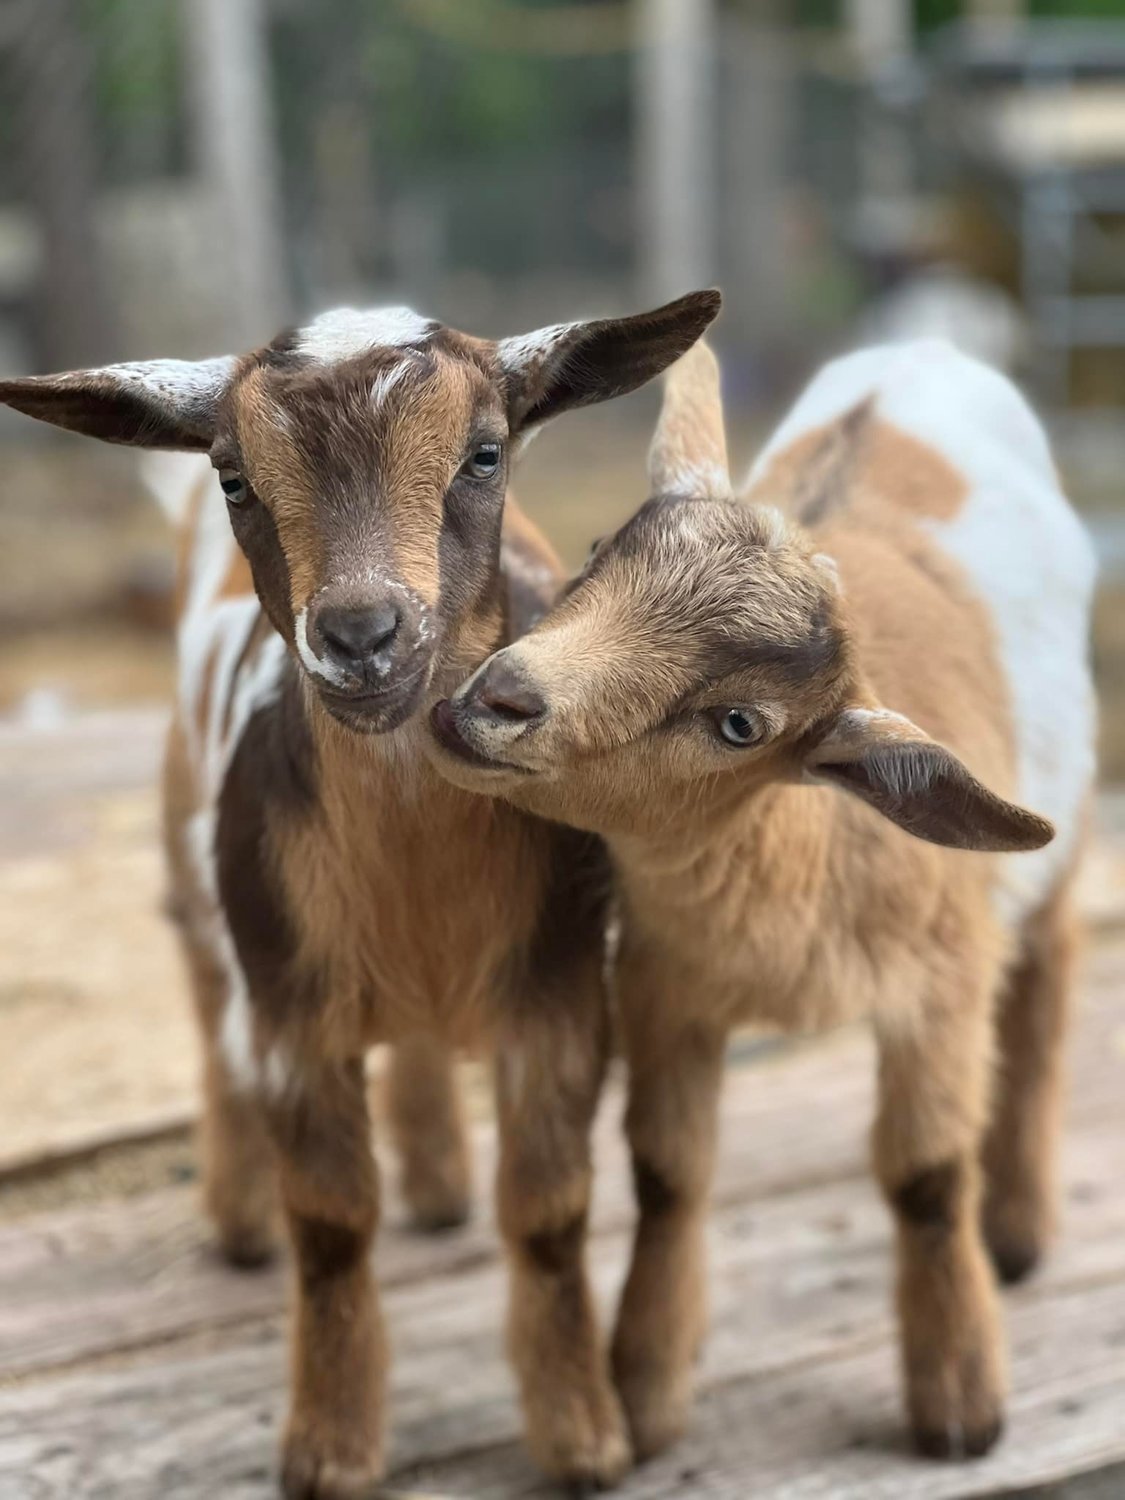 What started as a way to clear away some brush turned into a family passion for goats. Today, the Barnharts care for a herd of approximately 23 goats, primarily registered Nigerian Dwarfs and Mini-Nubians, though they are beginning to branch out into meat goats as well.